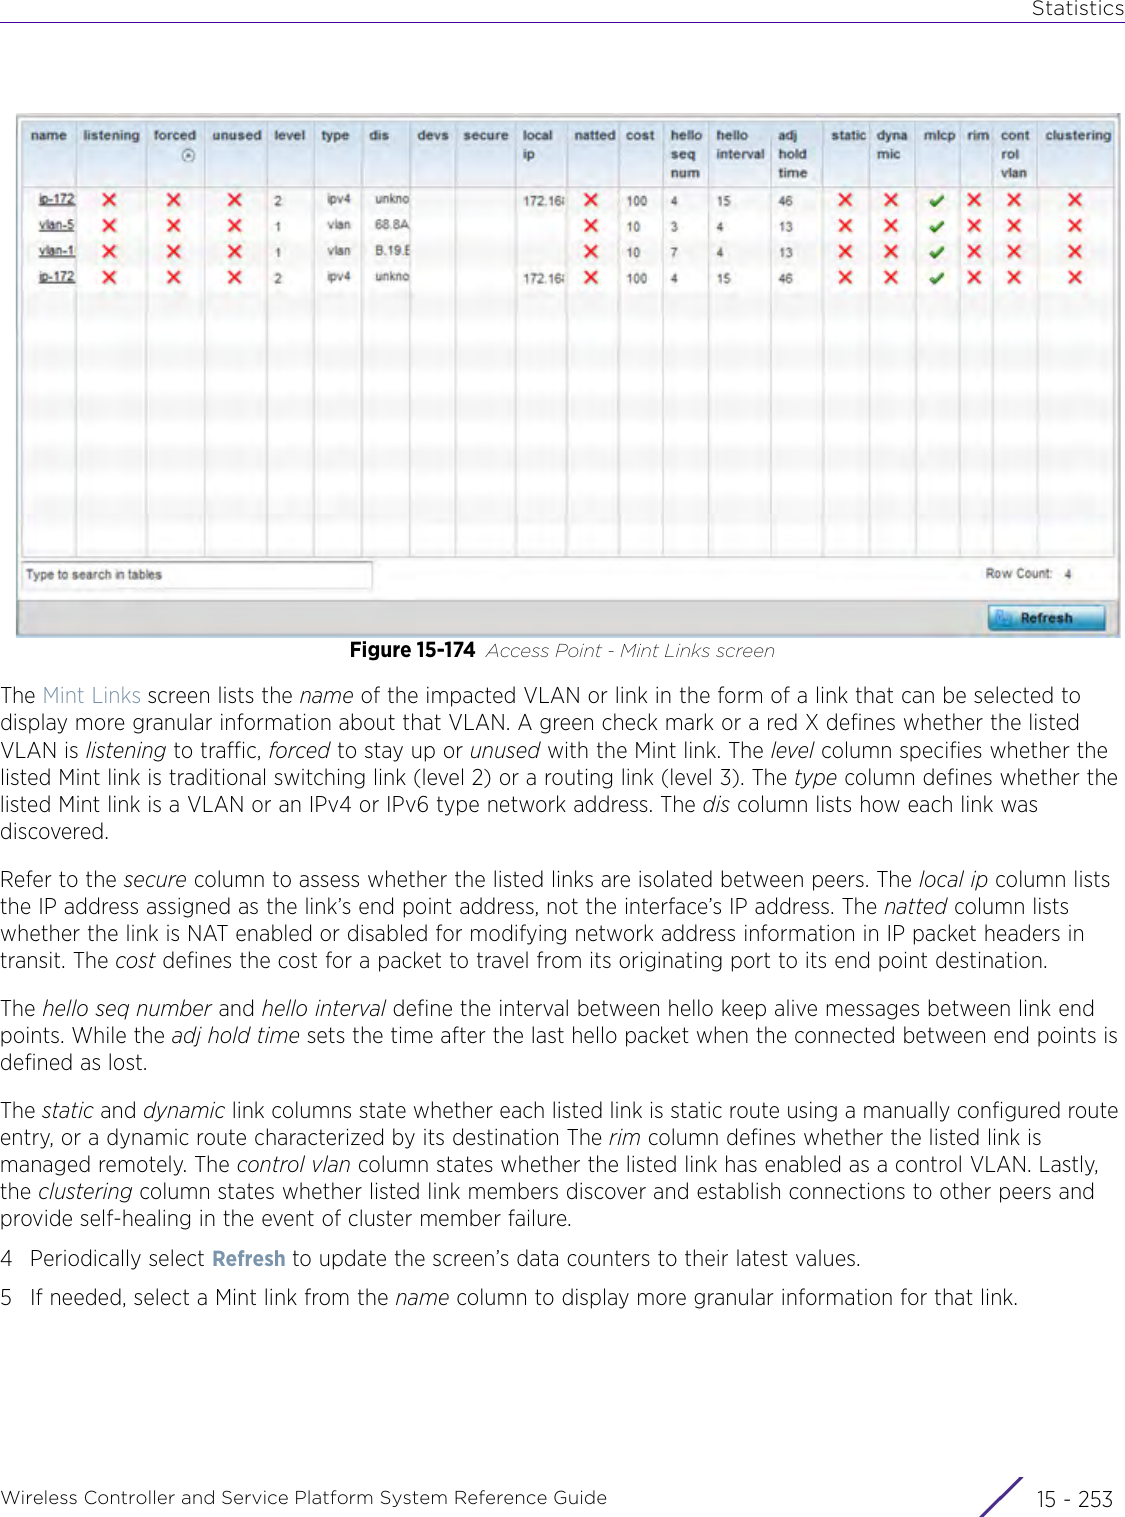 StatisticsWireless Controller and Service Platform System Reference Guide 15 - 253Figure 15-174 Access Point - Mint Links screenThe Mint Links screen lists the name of the impacted VLAN or link in the form of a link that can be selected to display more granular information about that VLAN. A green check mark or a red X defines whether the listed VLAN is listening to traffic, forced to stay up or unused with the Mint link. The level column specifies whether the listed Mint link is traditional switching link (level 2) or a routing link (level 3). The type column defines whether the listed Mint link is a VLAN or an IPv4 or IPv6 type network address. The dis column lists how each link was discovered.Refer to the secure column to assess whether the listed links are isolated between peers. The local ip column lists the IP address assigned as the link’s end point address, not the interface’s IP address. The natted column lists whether the link is NAT enabled or disabled for modifying network address information in IP packet headers in transit. The cost defines the cost for a packet to travel from its originating port to its end point destination.The hello seq number and hello interval define the interval between hello keep alive messages between link end points. While the adj hold time sets the time after the last hello packet when the connected between end points is defined as lost. The static and dynamic link columns state whether each listed link is static route using a manually configured route entry, or a dynamic route characterized by its destination The rim column defines whether the listed link is managed remotely. The control vlan column states whether the listed link has enabled as a control VLAN. Lastly, the clustering column states whether listed link members discover and establish connections to other peers and provide self-healing in the event of cluster member failure.4 Periodically select Refresh to update the screen’s data counters to their latest values.5 If needed, select a Mint link from the name column to display more granular information for that link.